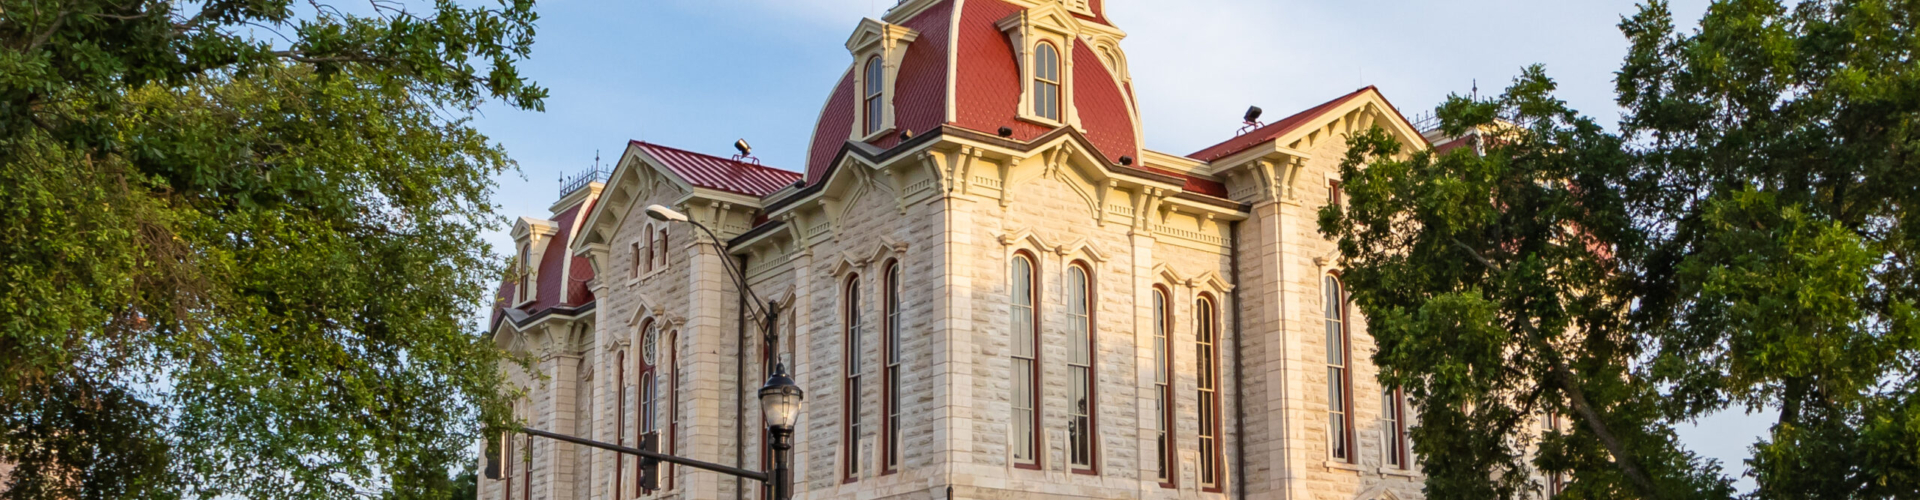 Courthouse_1_of_2__1903154923